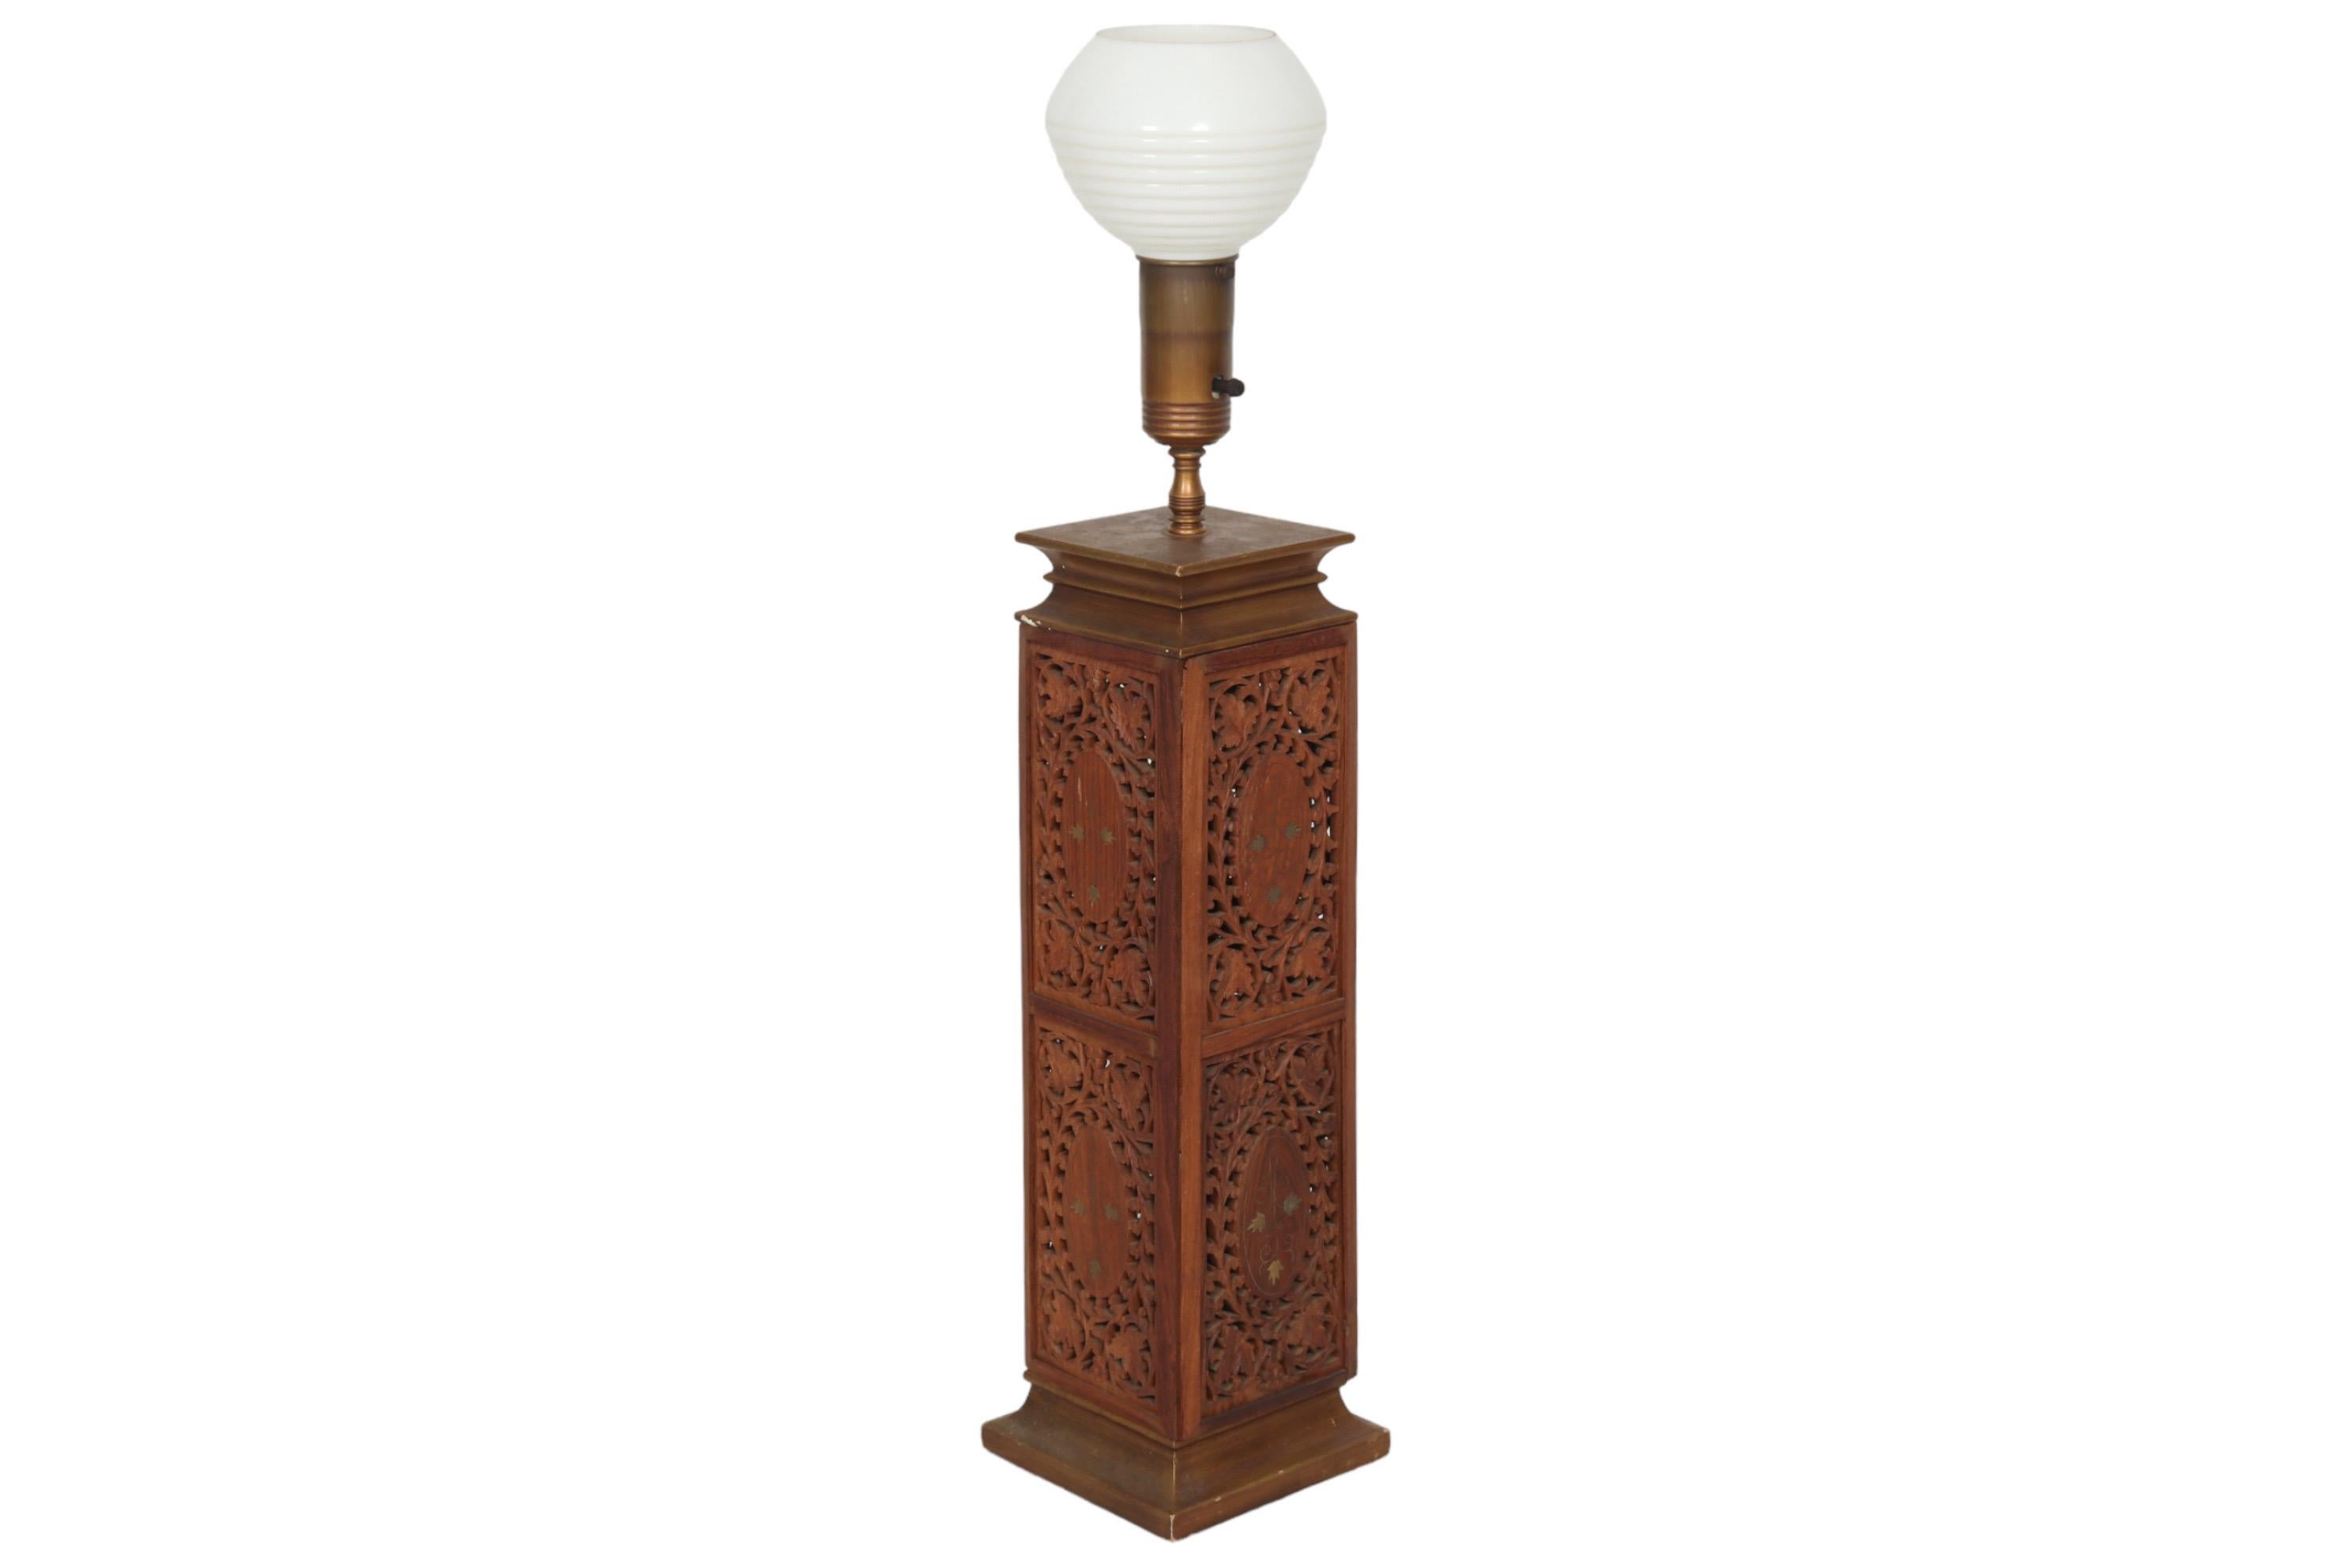 An Indian carved and brass inlaid wooden lamp. An open top ribbed glass globe in white is supported on a highly decorative wooden box. Finely carved and pierced with leaves and berries on a vine. At the center of each face is an oval inlaid with